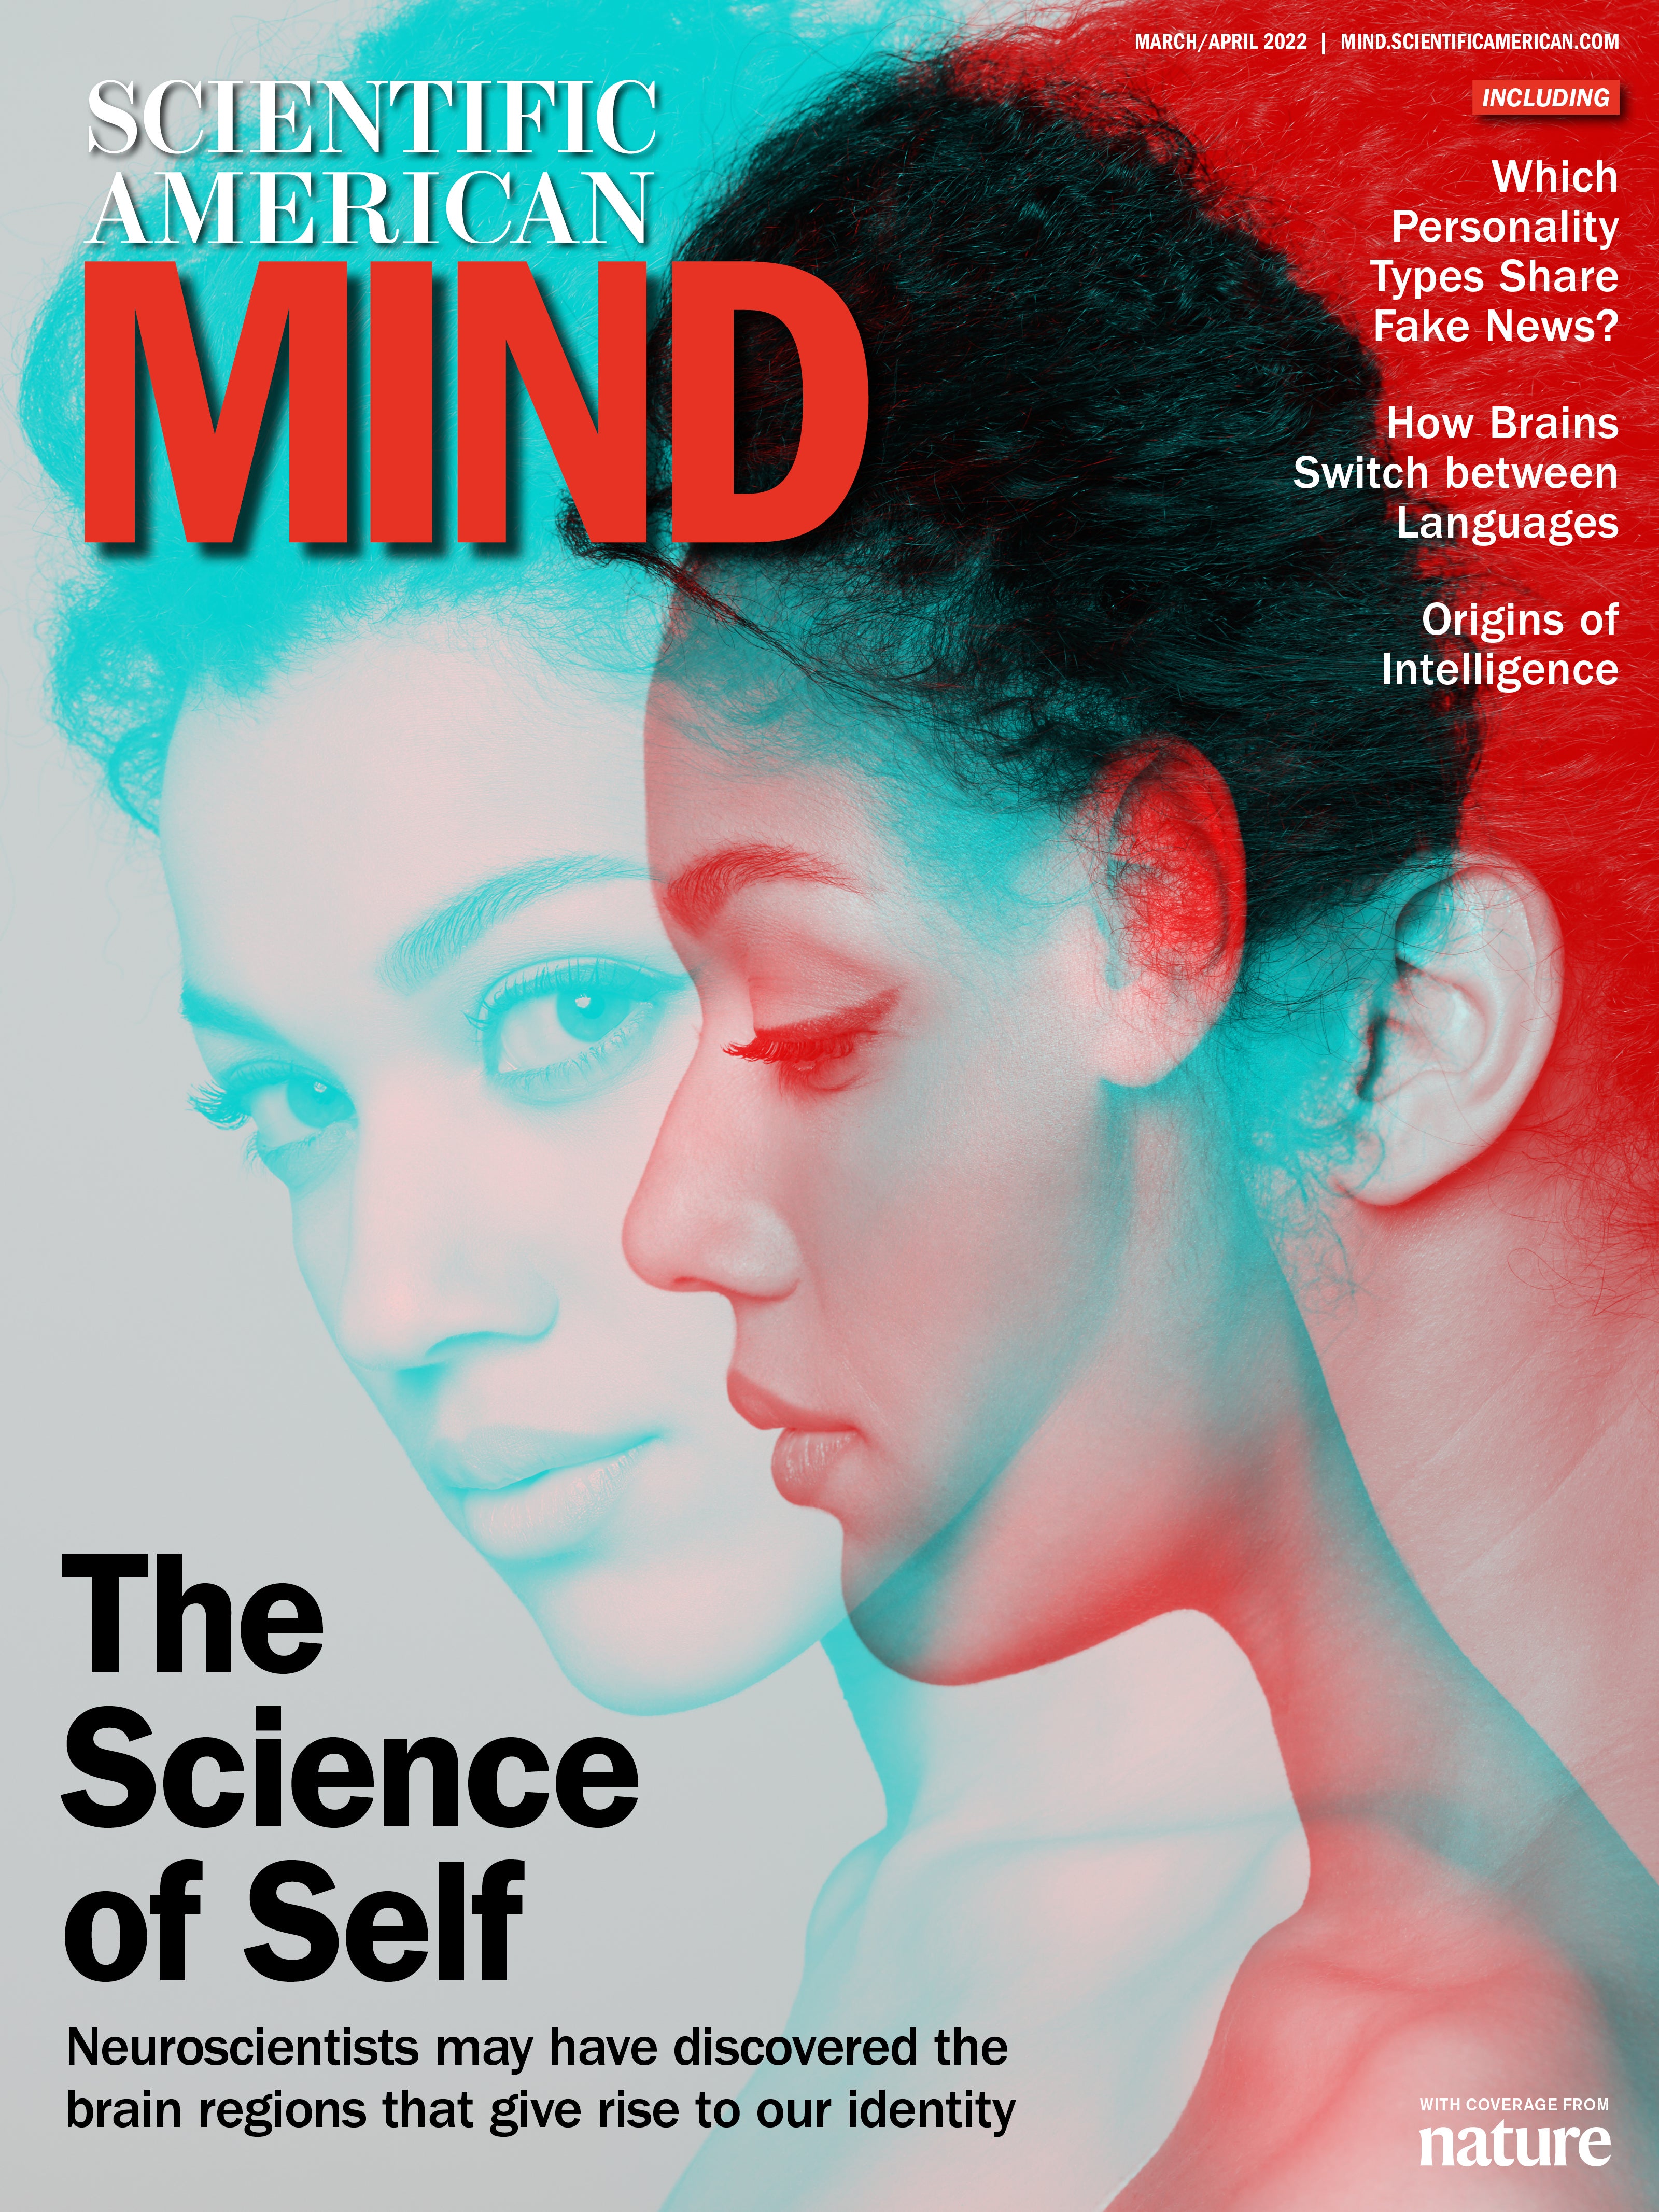 Scientific American Mind: The Science of Self